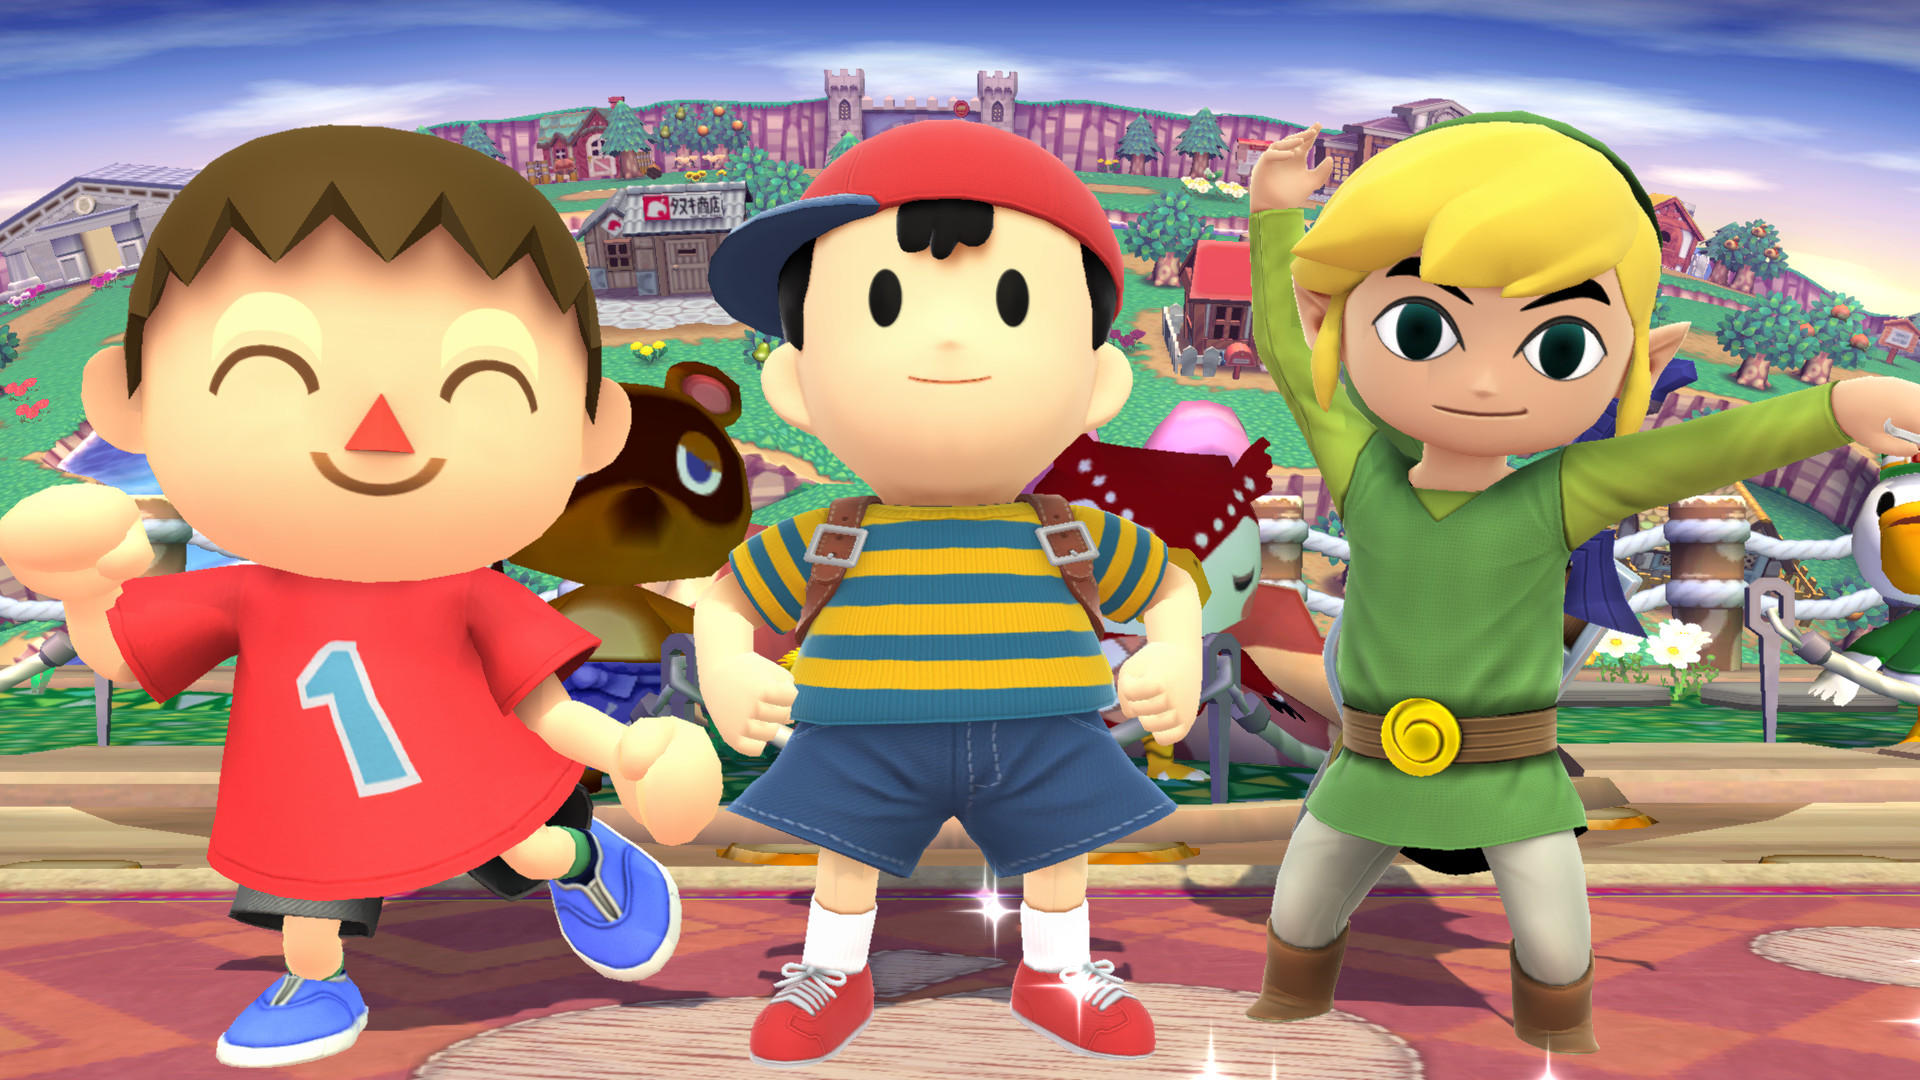 1920x1080 Image - Villager Ness and Toon Link.png | Smashpedia | FANDOM powered by  Wikia